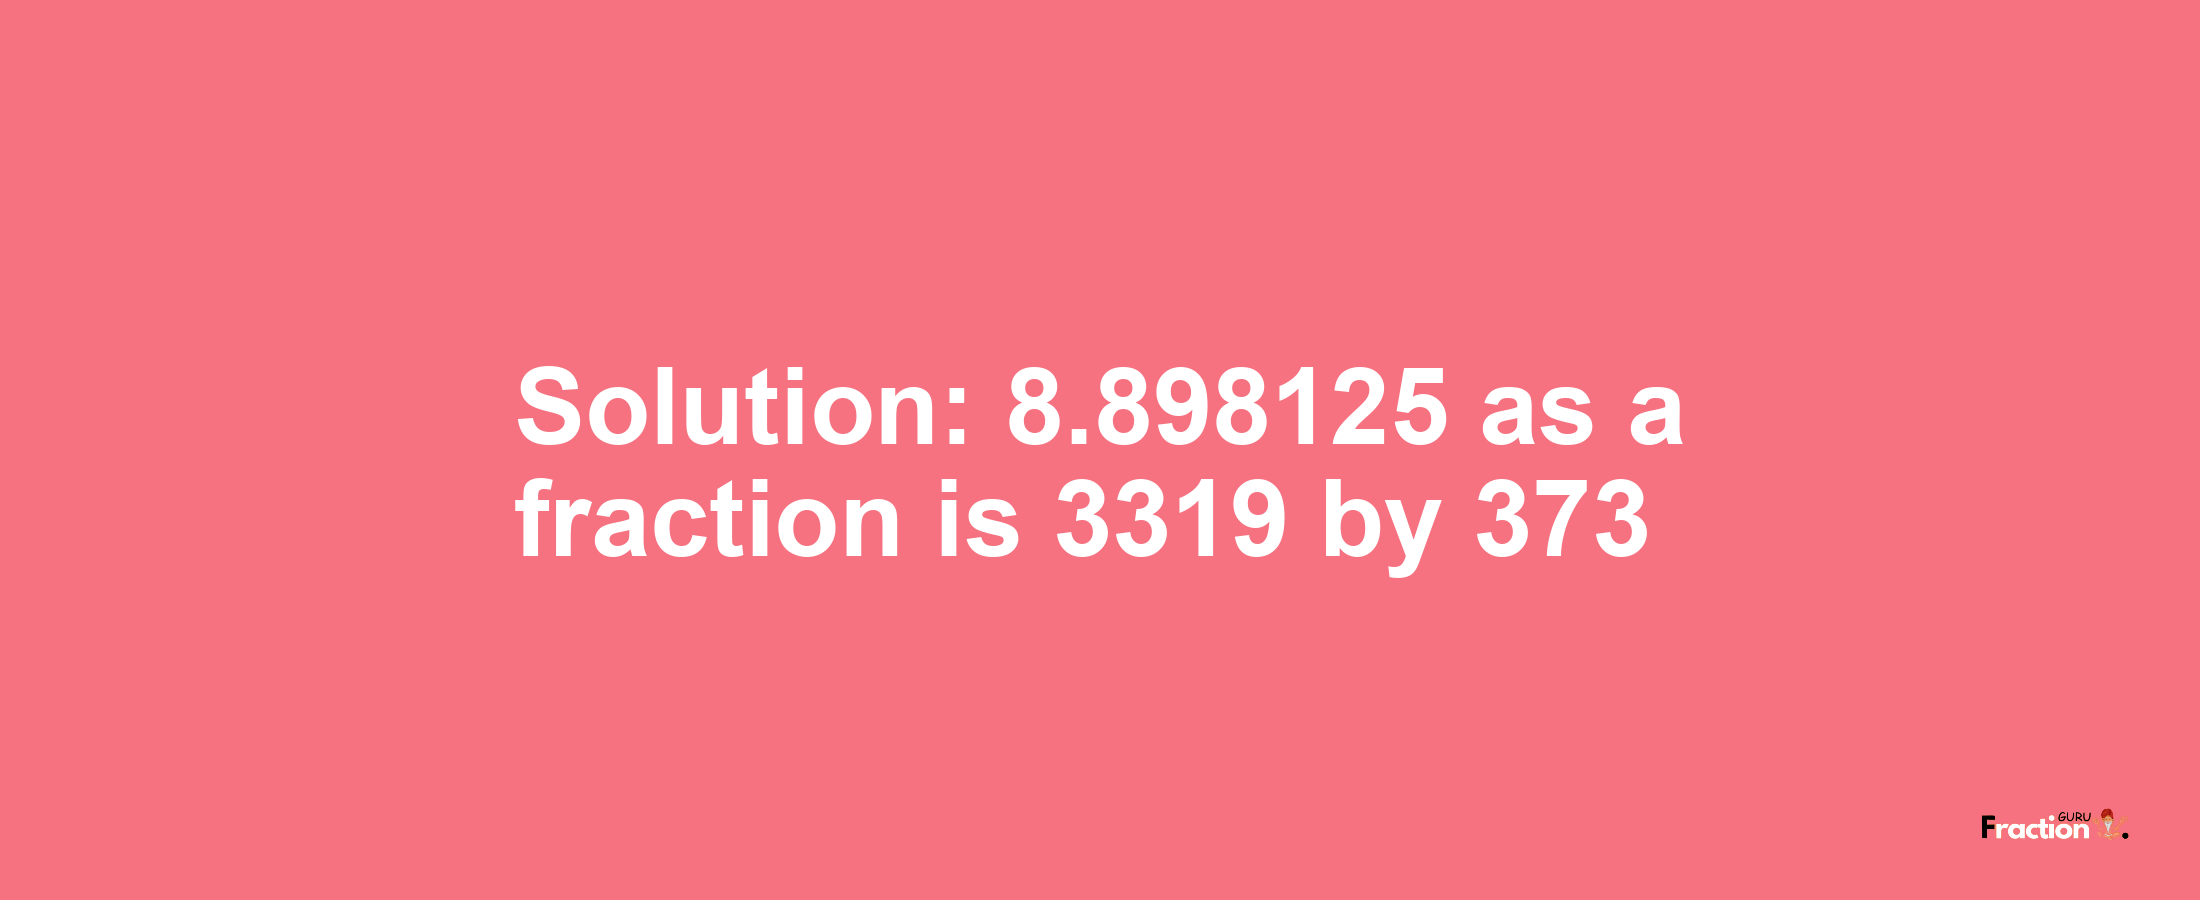 Solution:8.898125 as a fraction is 3319/373